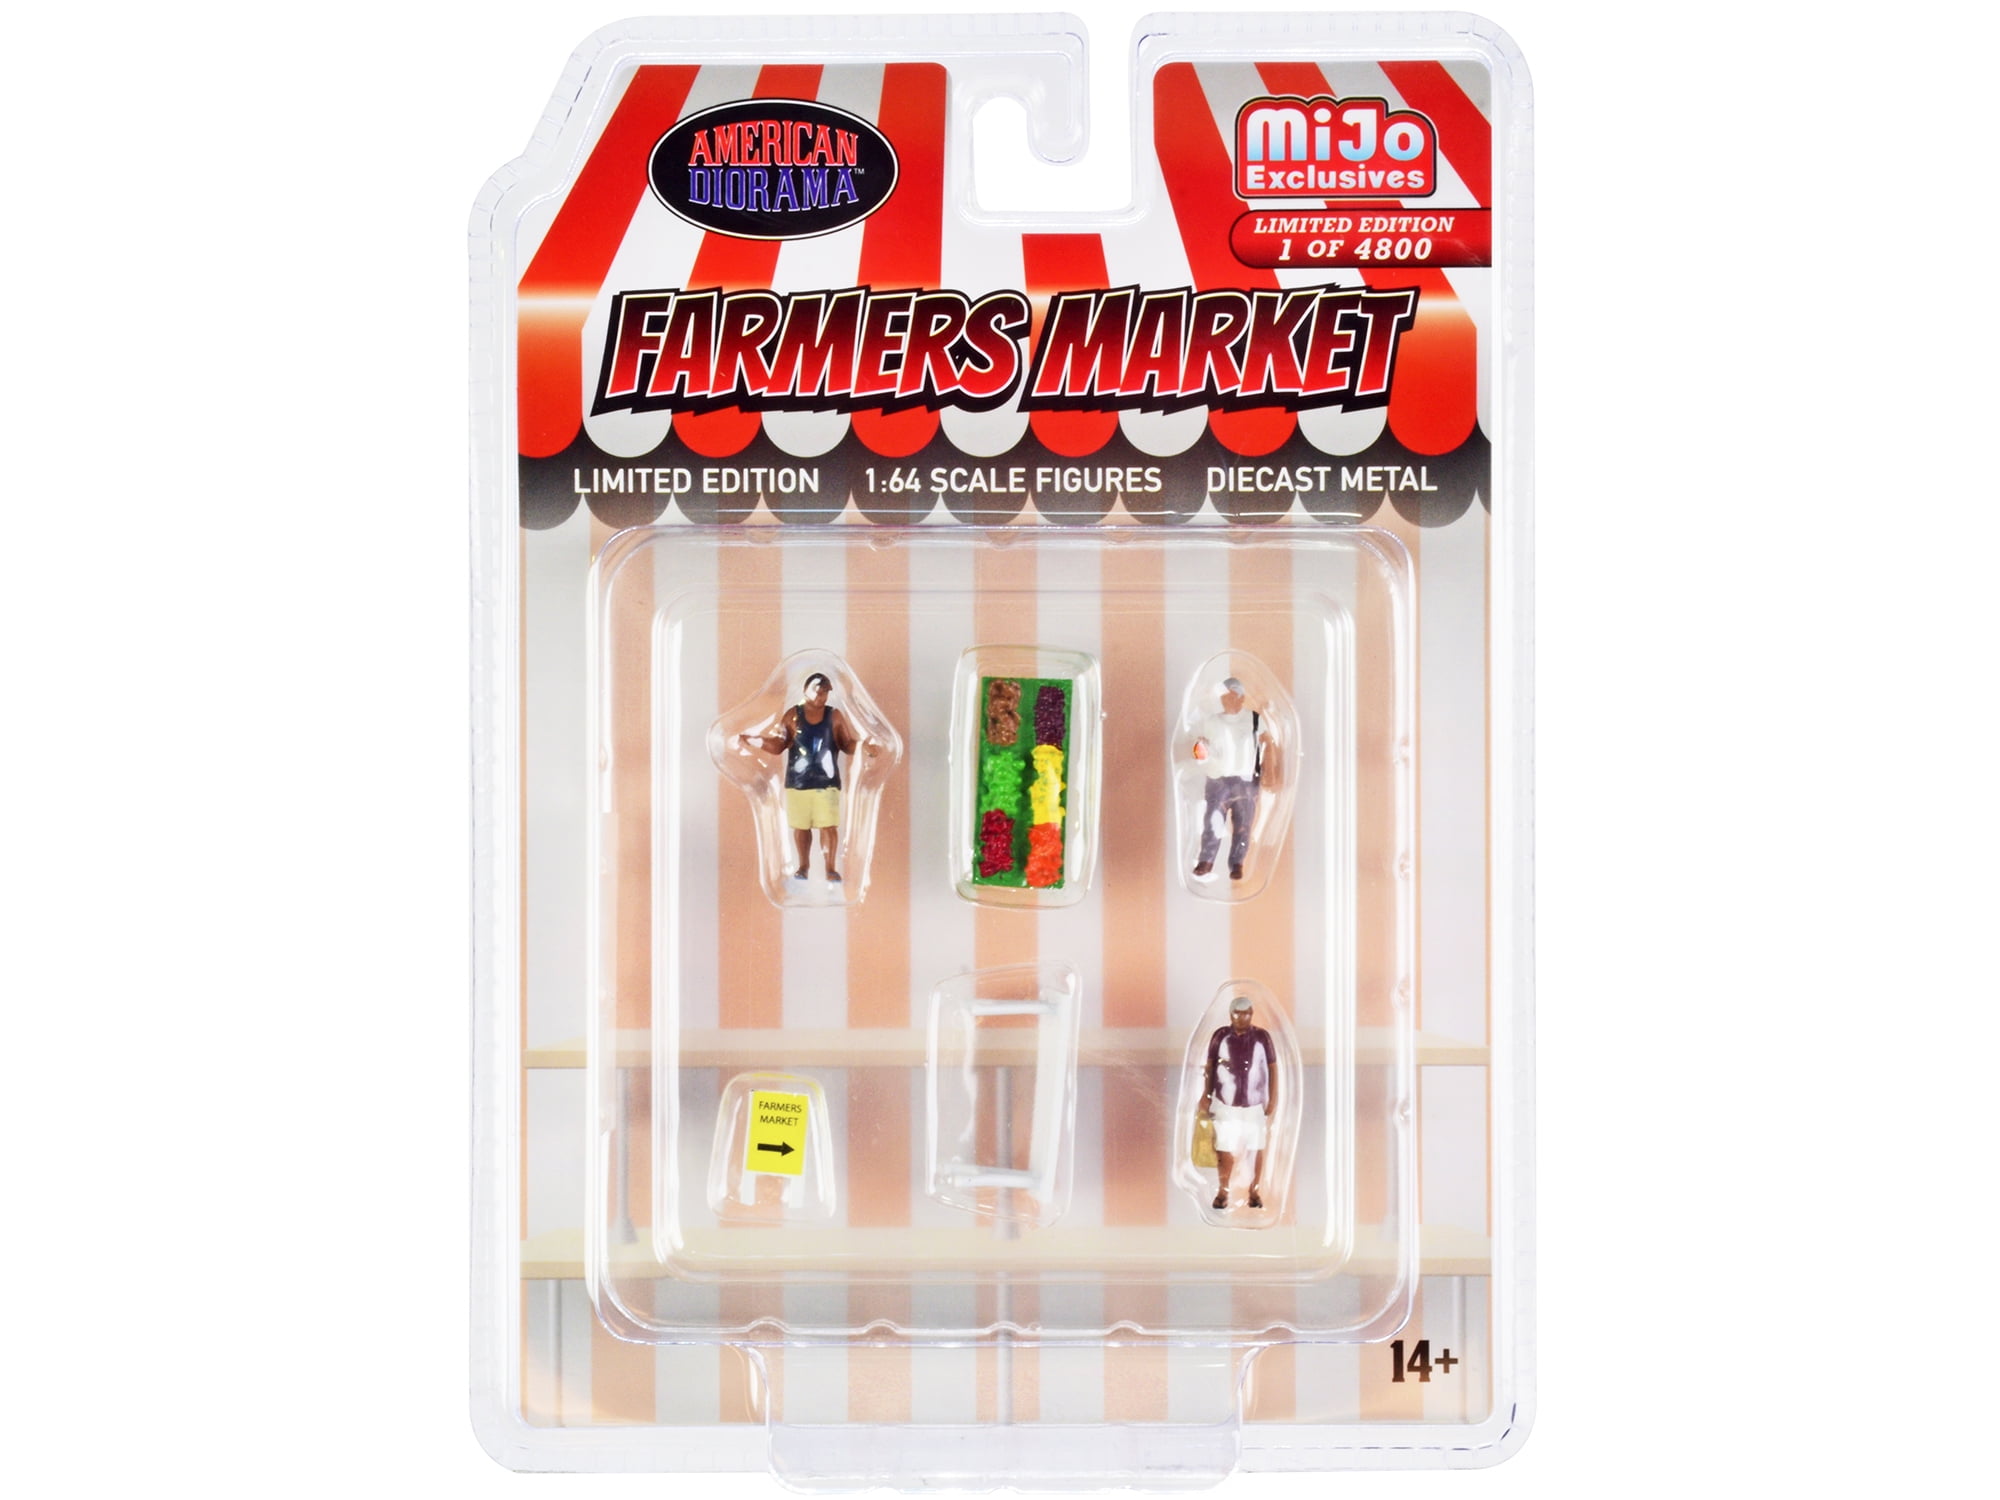 Picture of American Diorama AD-76501MJ Farmers Market Diecast 3 Figures & 3 Accessories Figure Set - Limited Edition to 4800 Pieces Worldwide for 1 by 64 Scale Models - 6 Piece